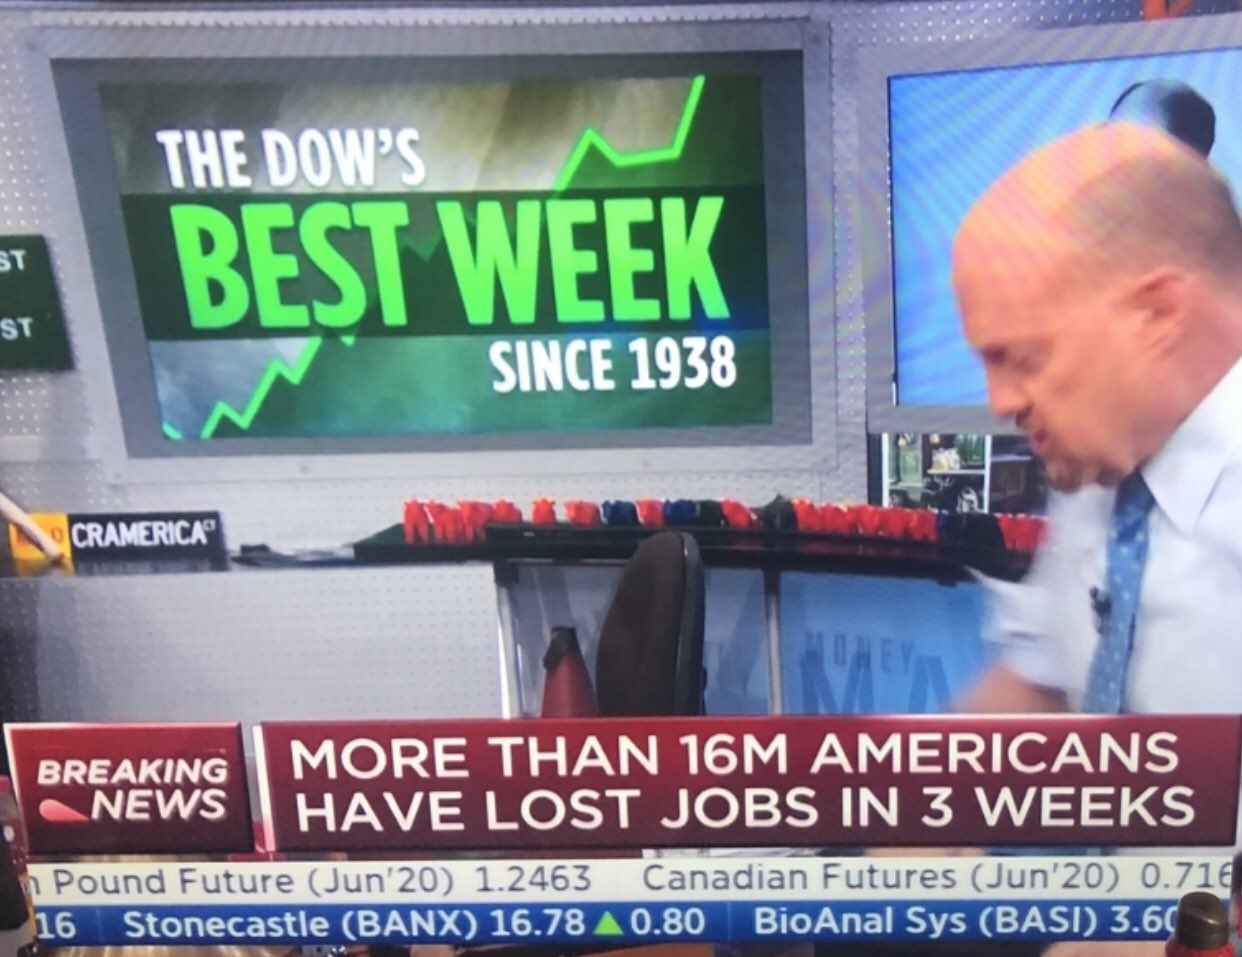 corporate socialism at its finest - tens of millions of unemployed Americans but stock market has its best week since 1938